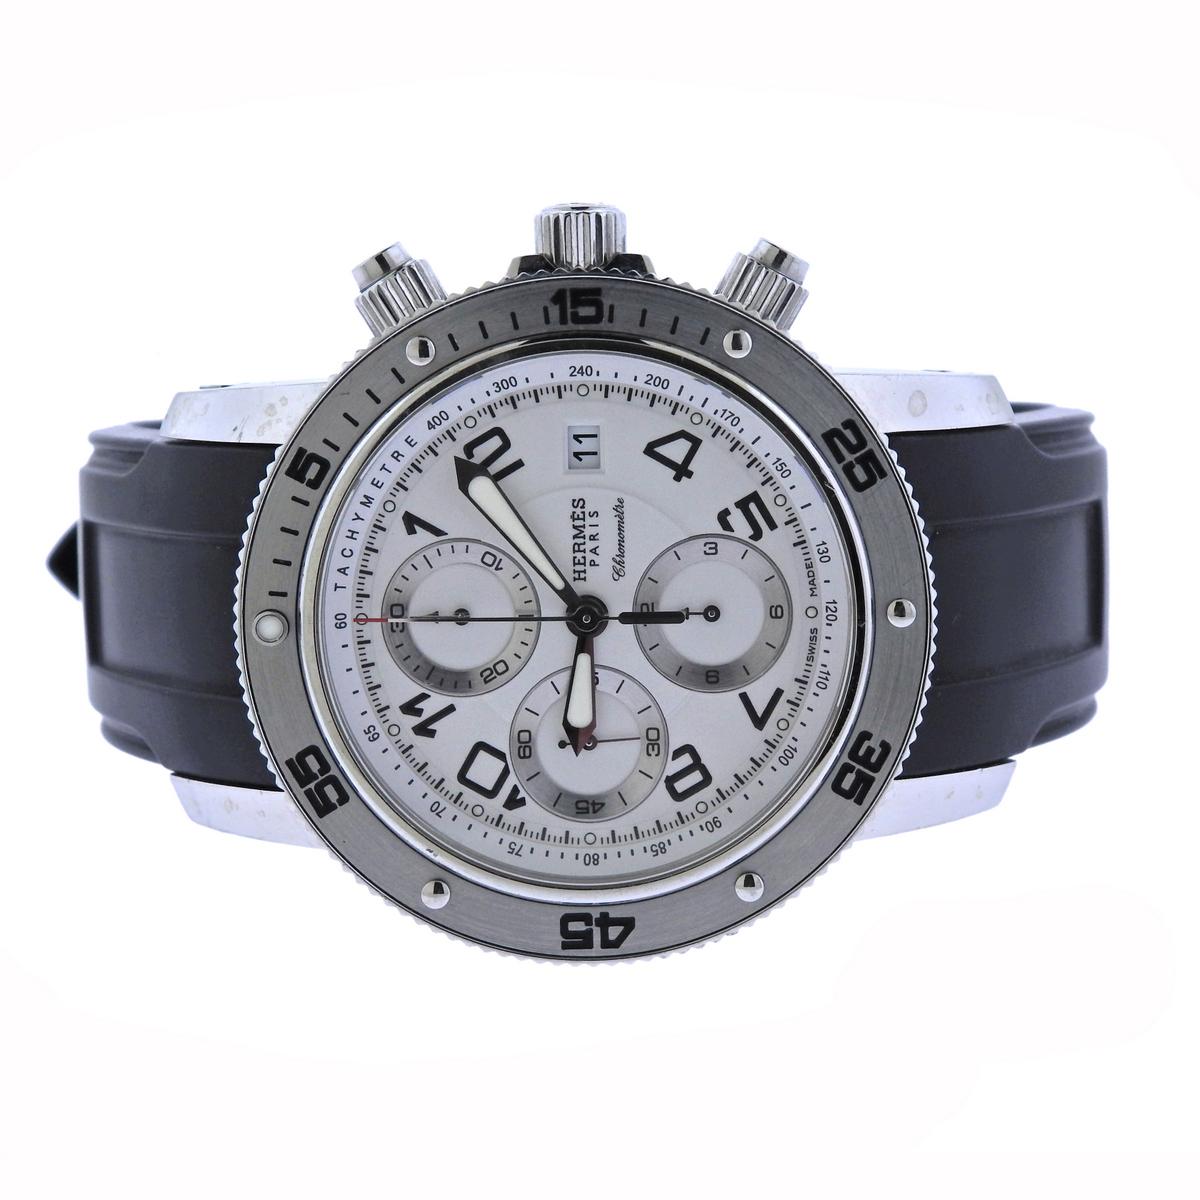 Hermes Clipper Chrono 44 Mechanical Diver's Chronograph Watch CP2.910